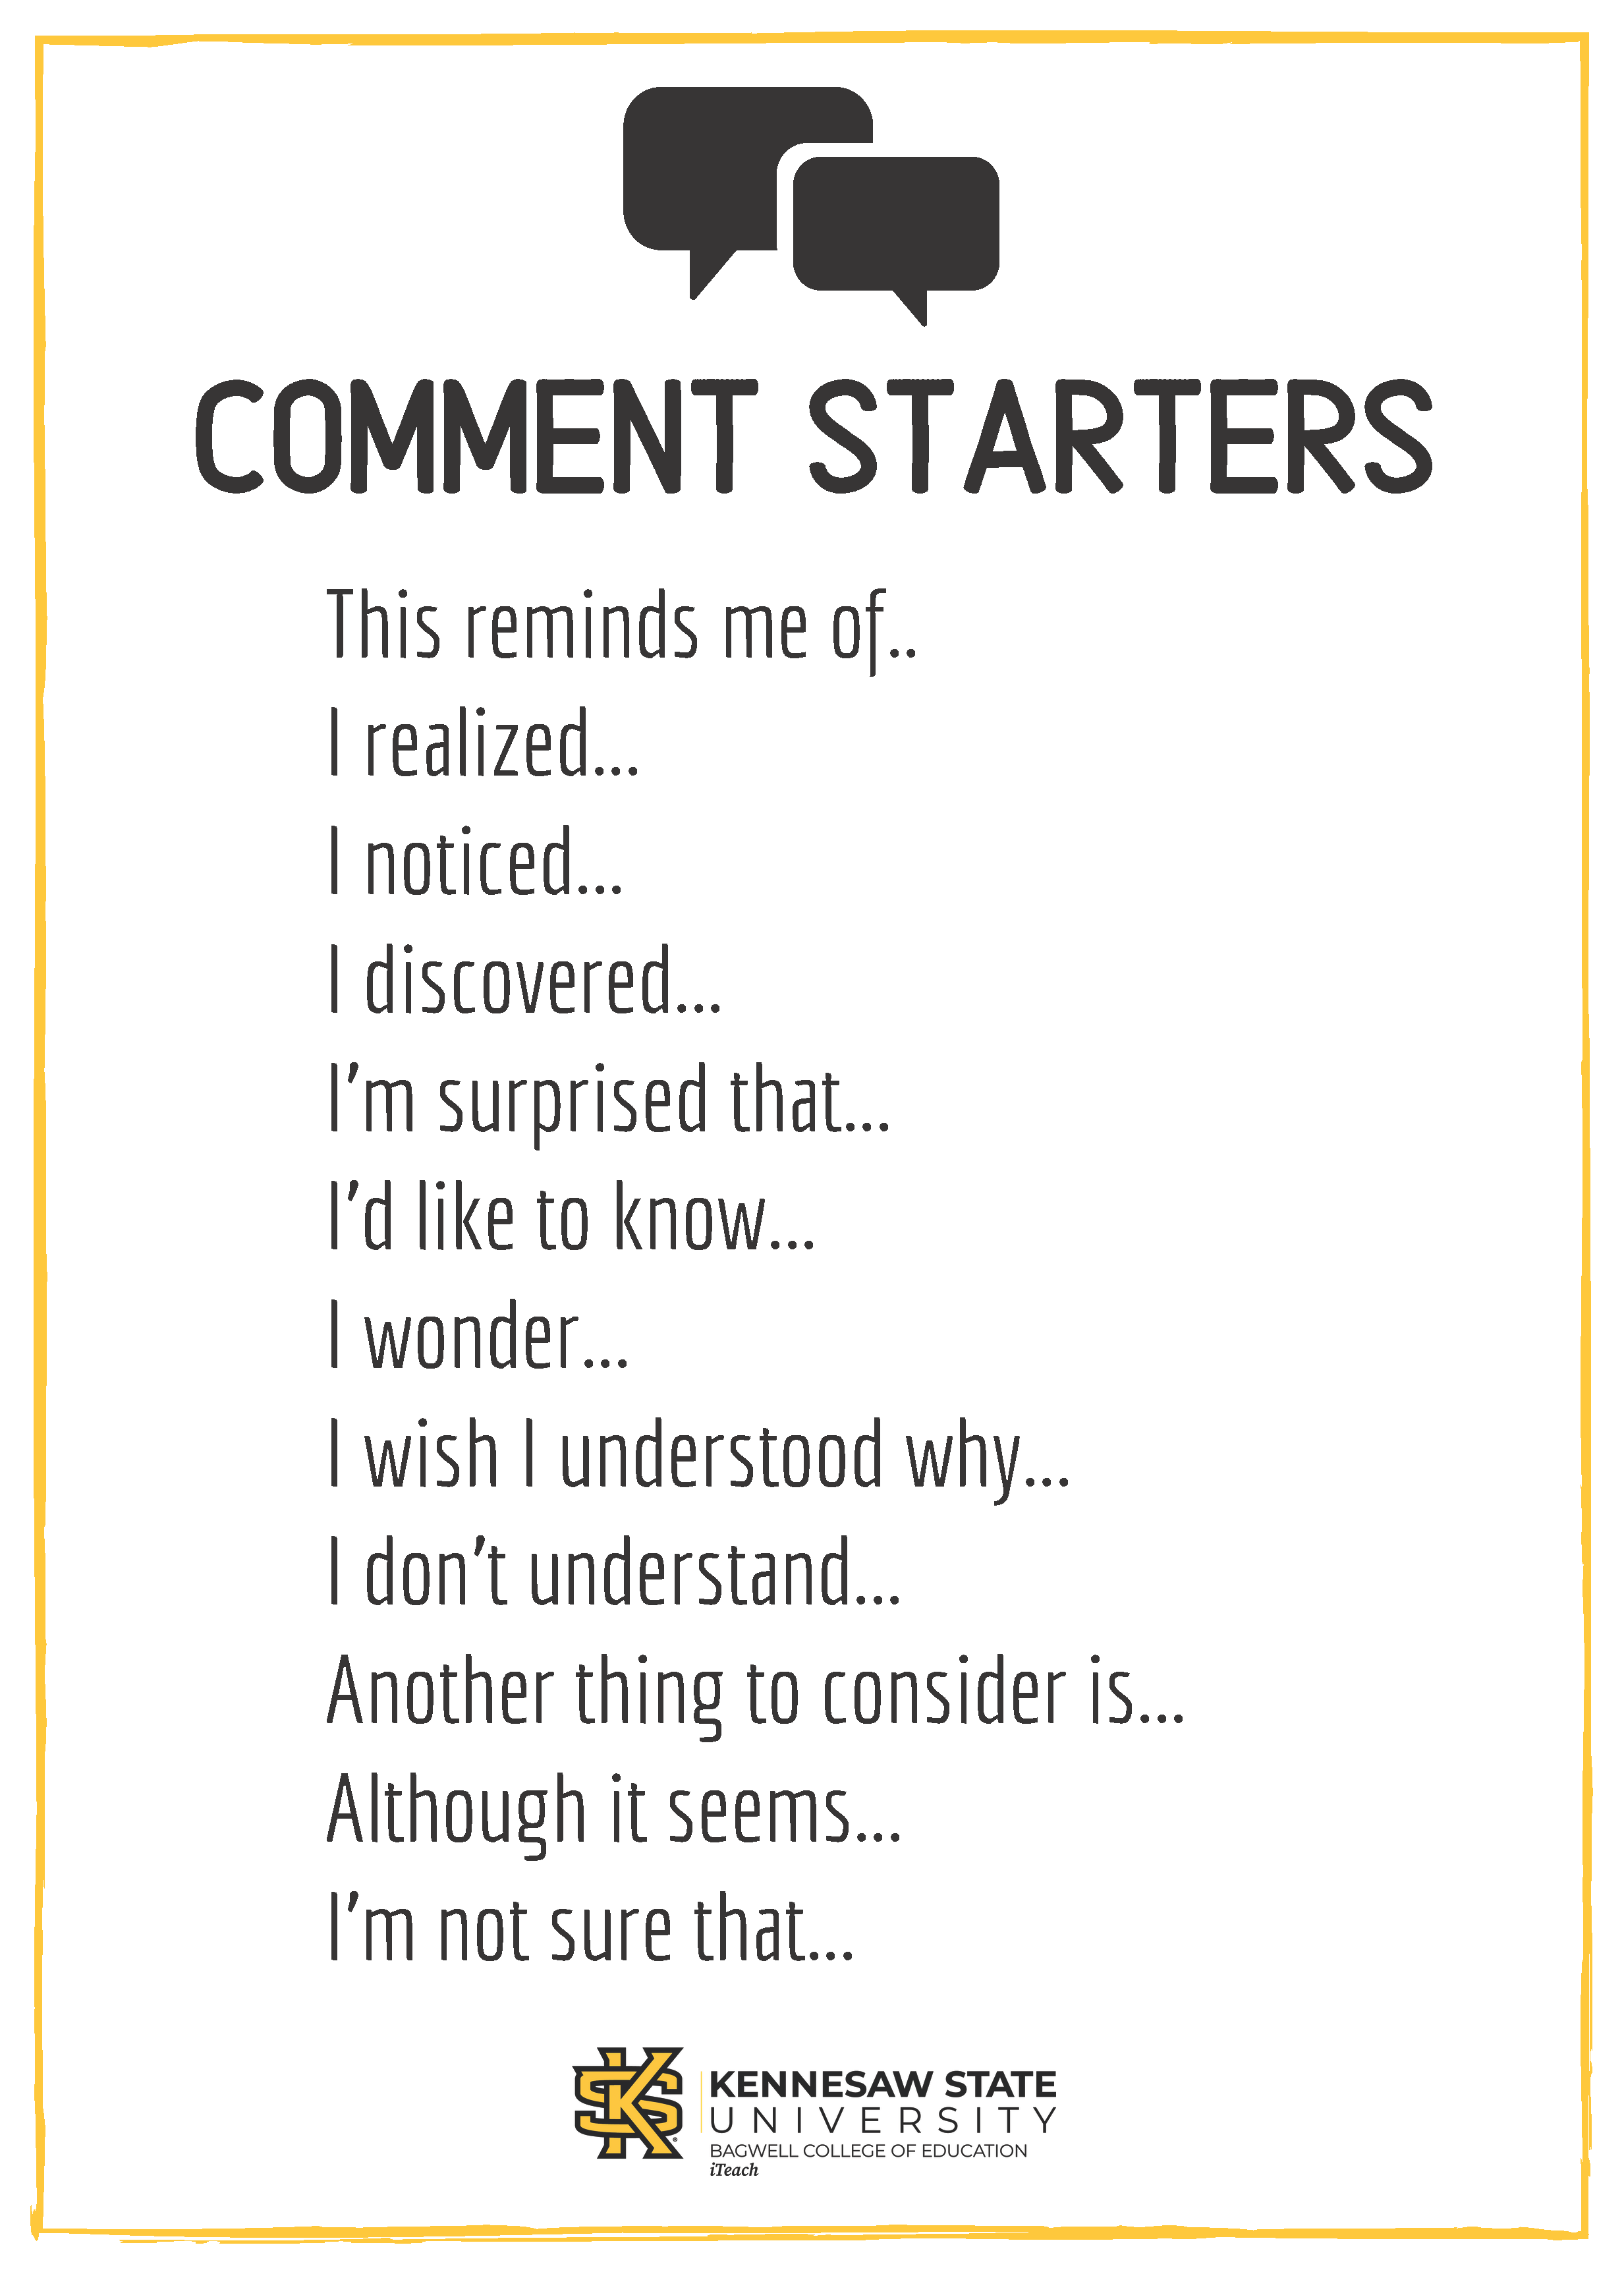 Comment Starters.png